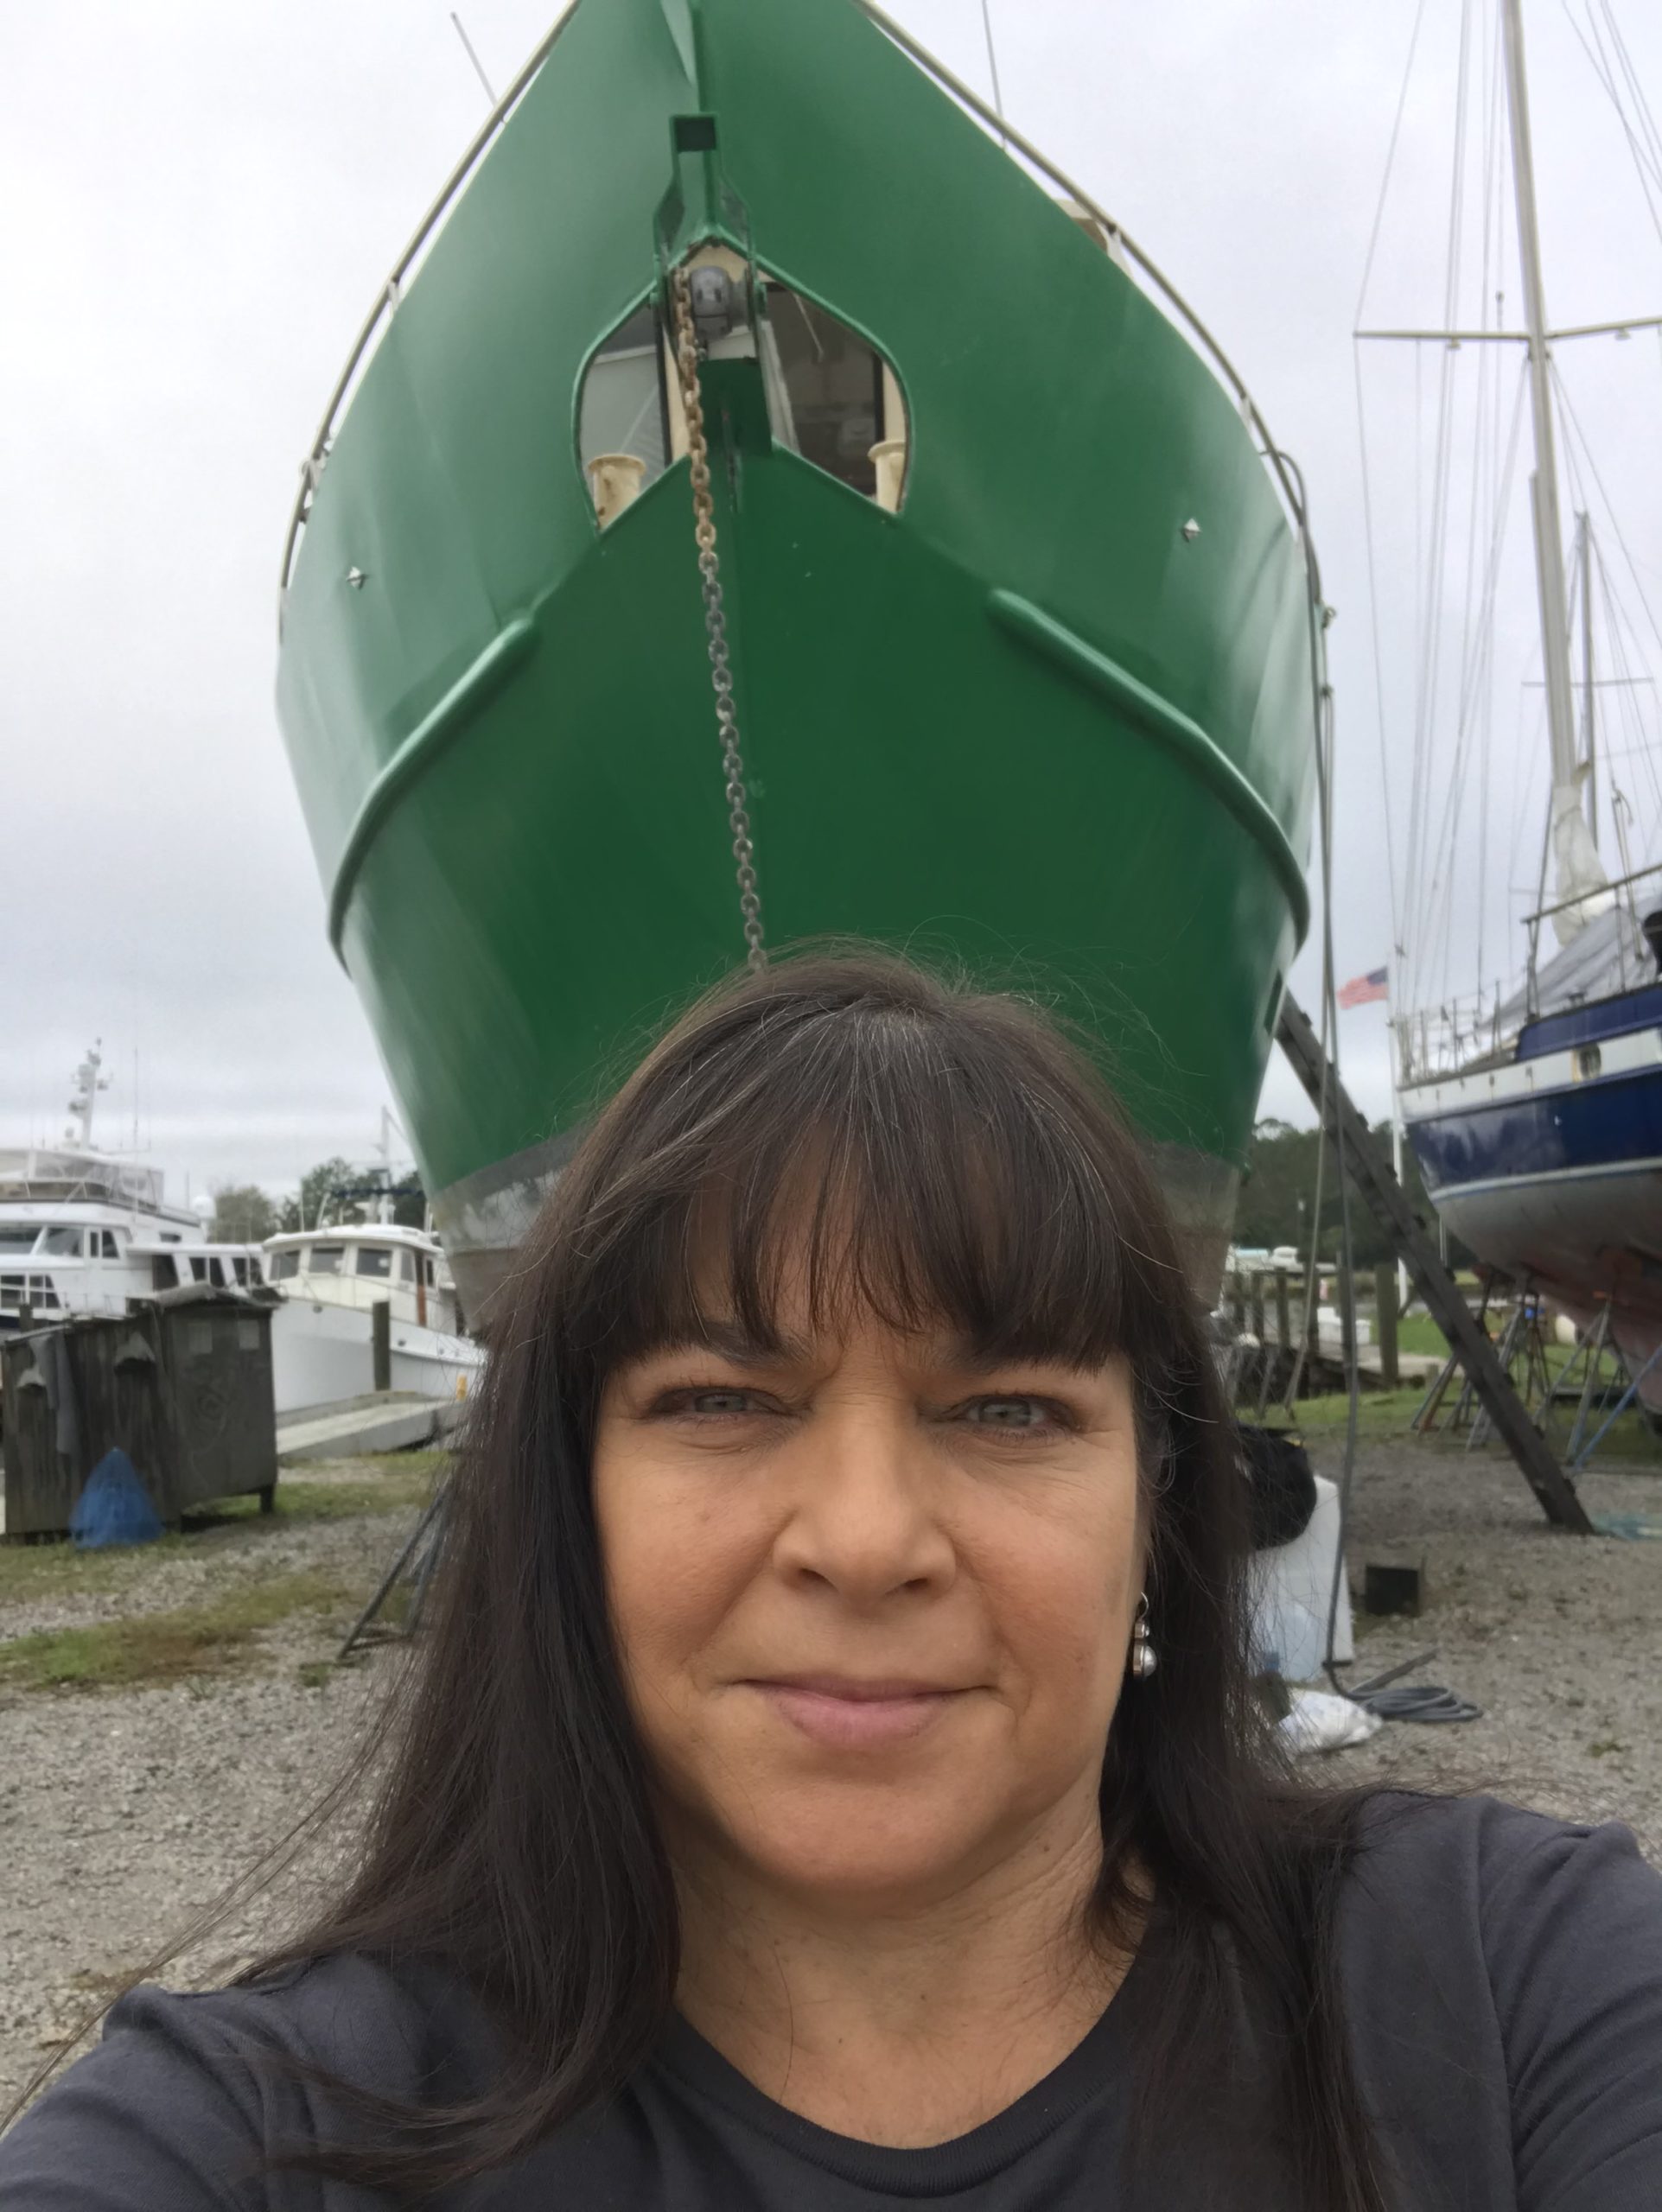 Gari's selfie photo with the boat